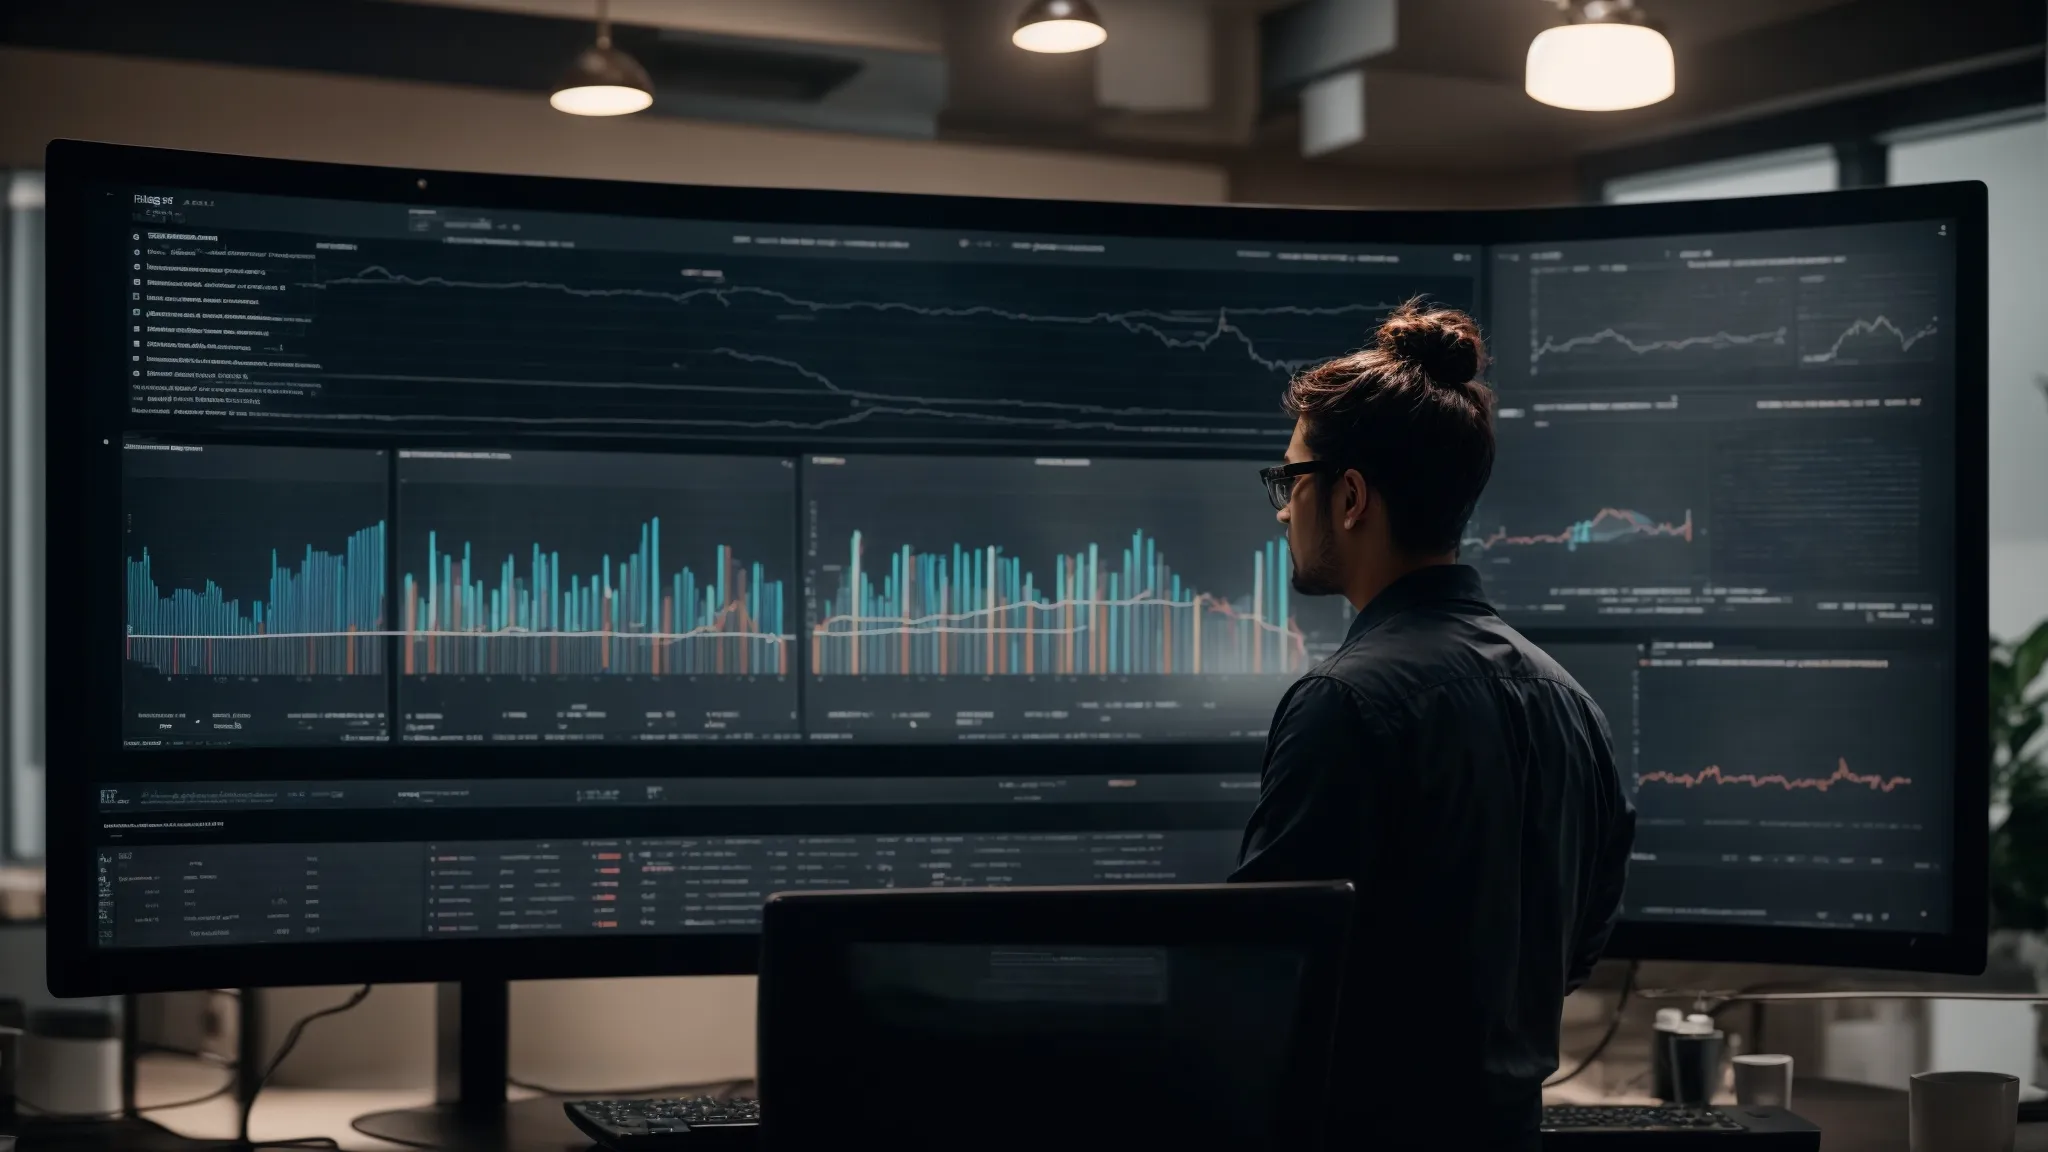 a web developer observing analytics on a large screen displays trends and performance metrics.